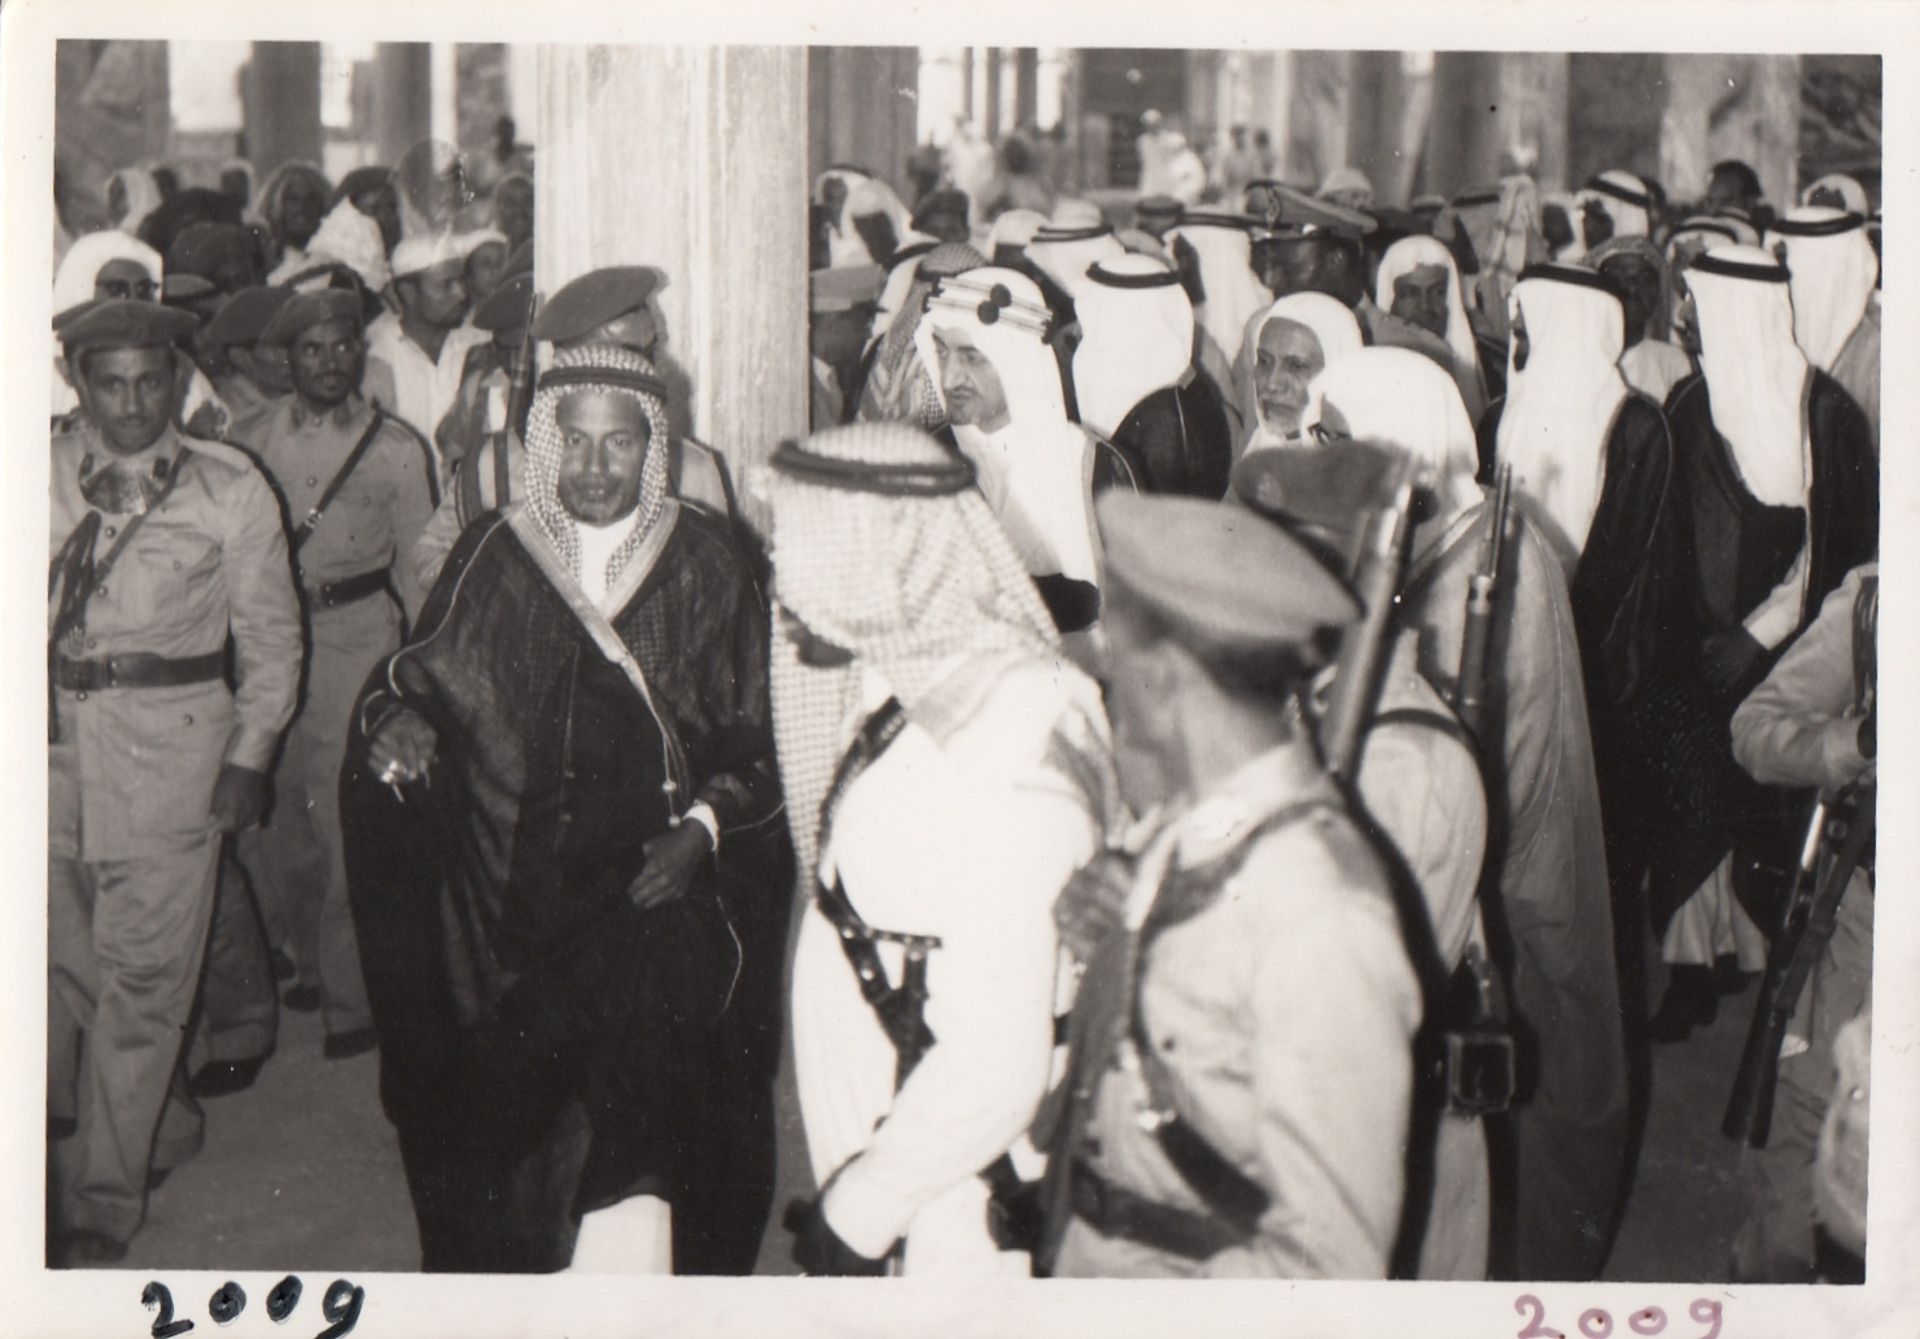 A COLLECTION OF PHOTOGRAPHS OF HIS MAJESTY KING FAISAL BIN ABDUL AZIZ VISITING THE GRAND MOSQUES OF - Image 5 of 24